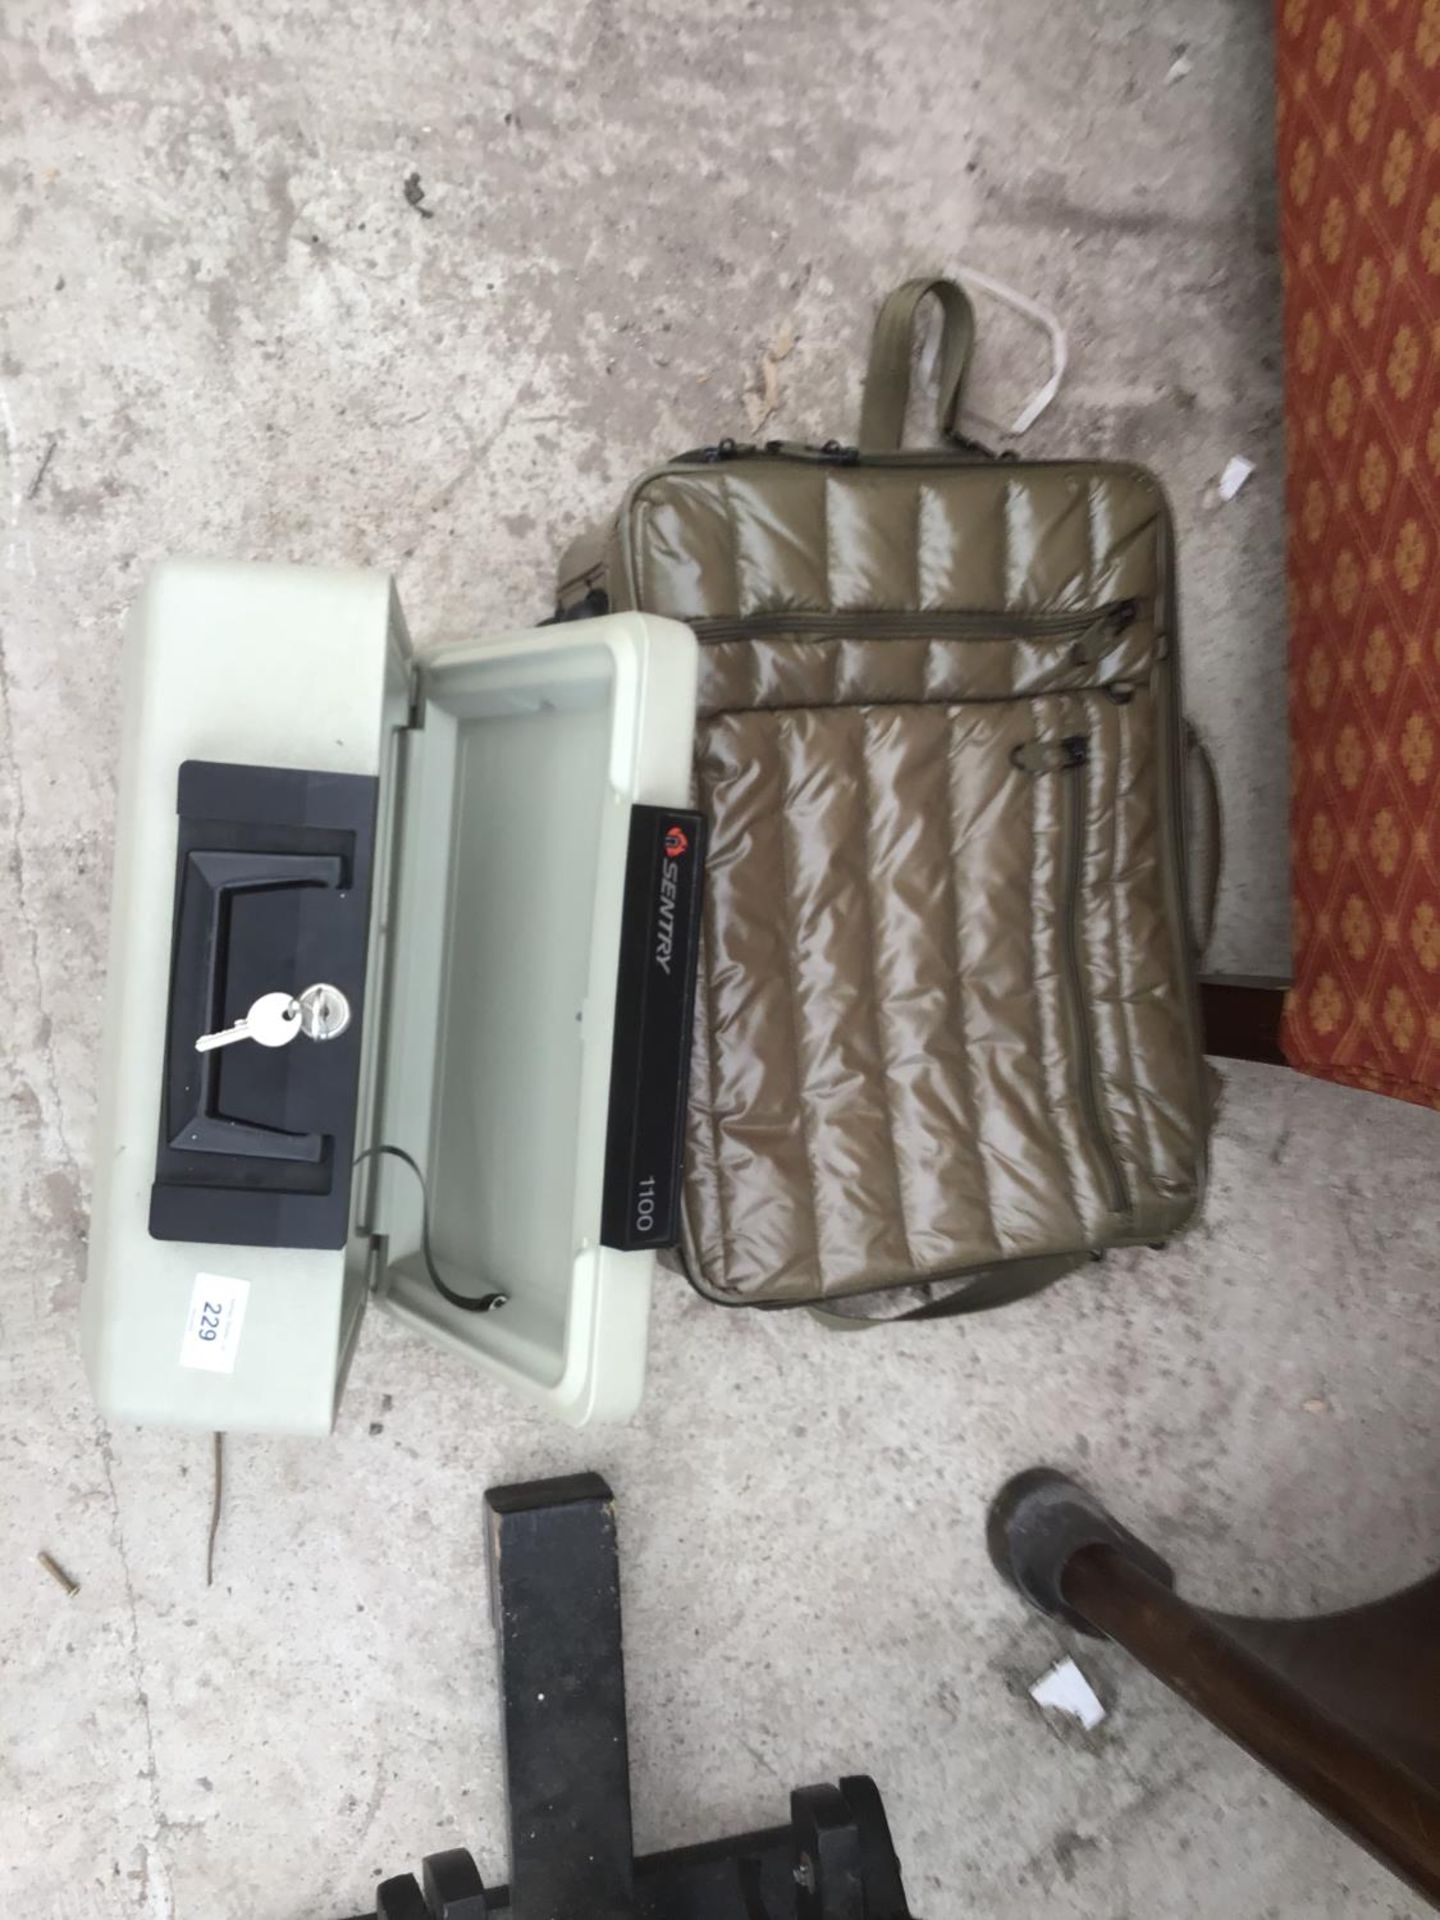 A SENTRY SECURITY BOX WITH KEYS AND AN AS NEW IT LUGGAGE LIGHTWEIGHT TRAVEL BAG